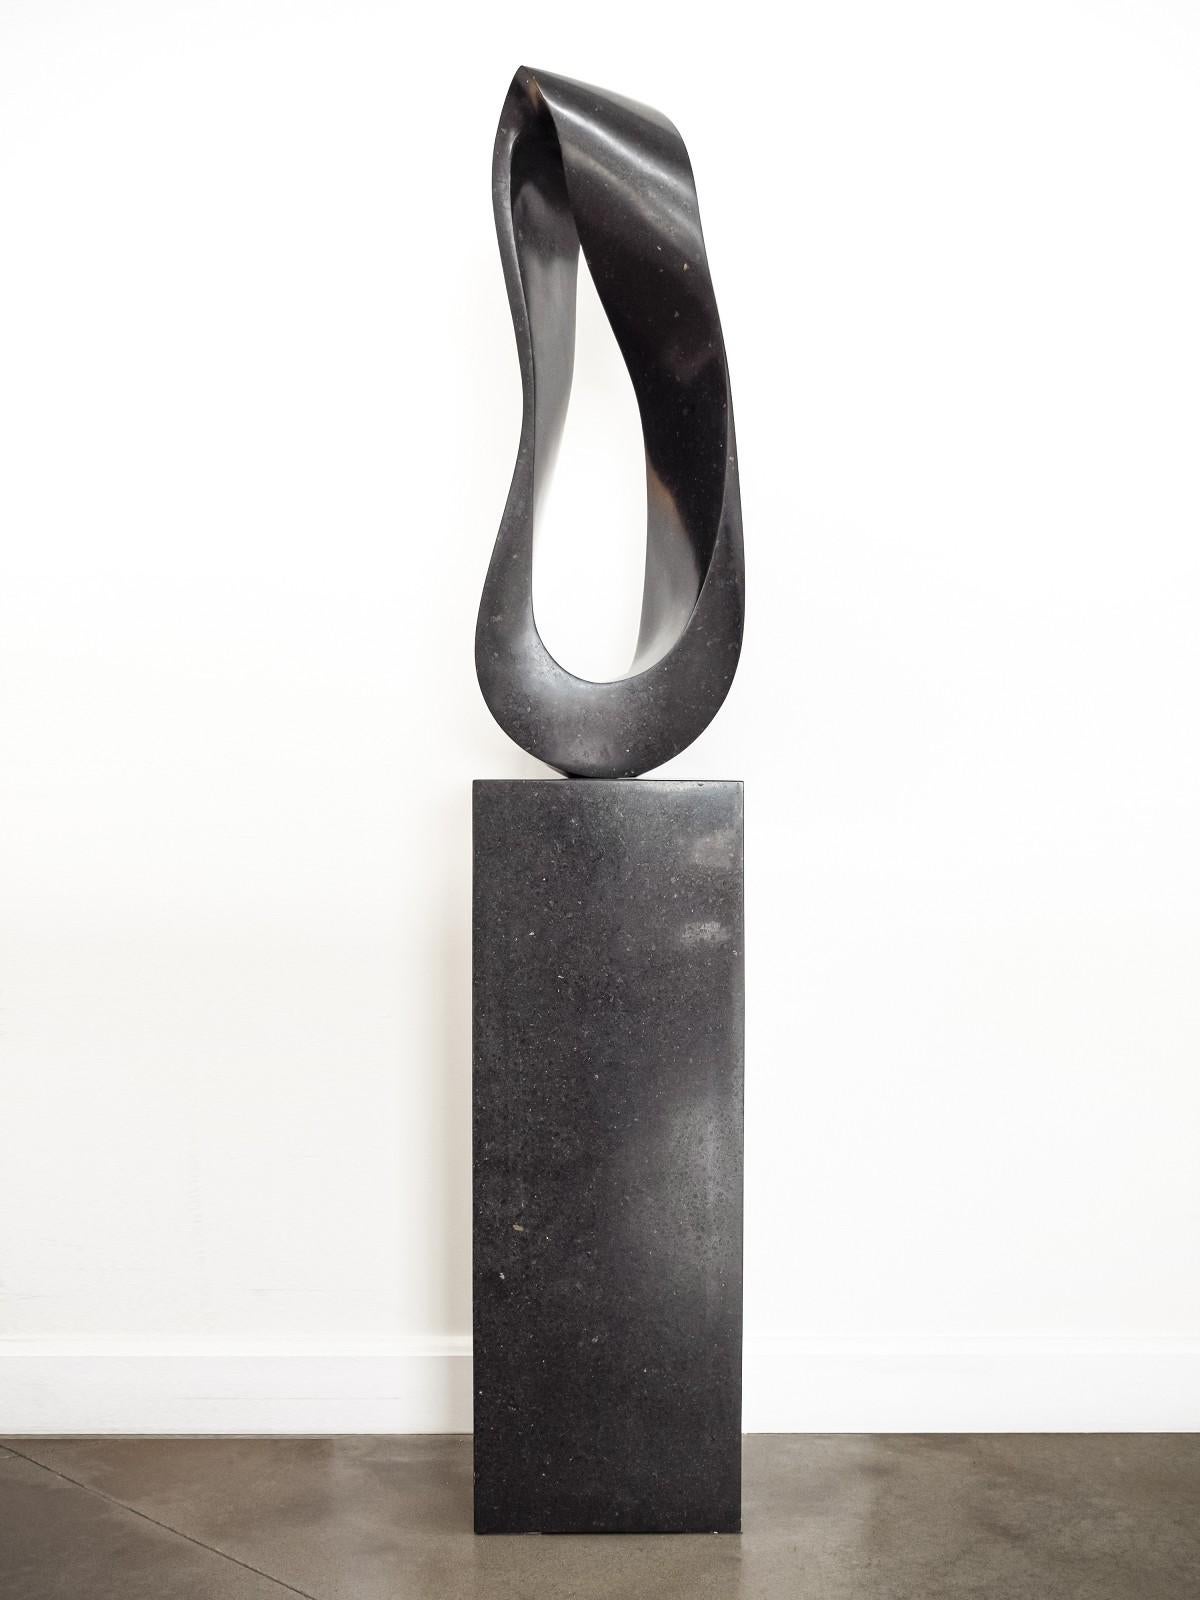 Mobius H3 13/50 - smooth, elegant, black granite, abstract sculpture on plinth - Sculpture by Jeremy Guy